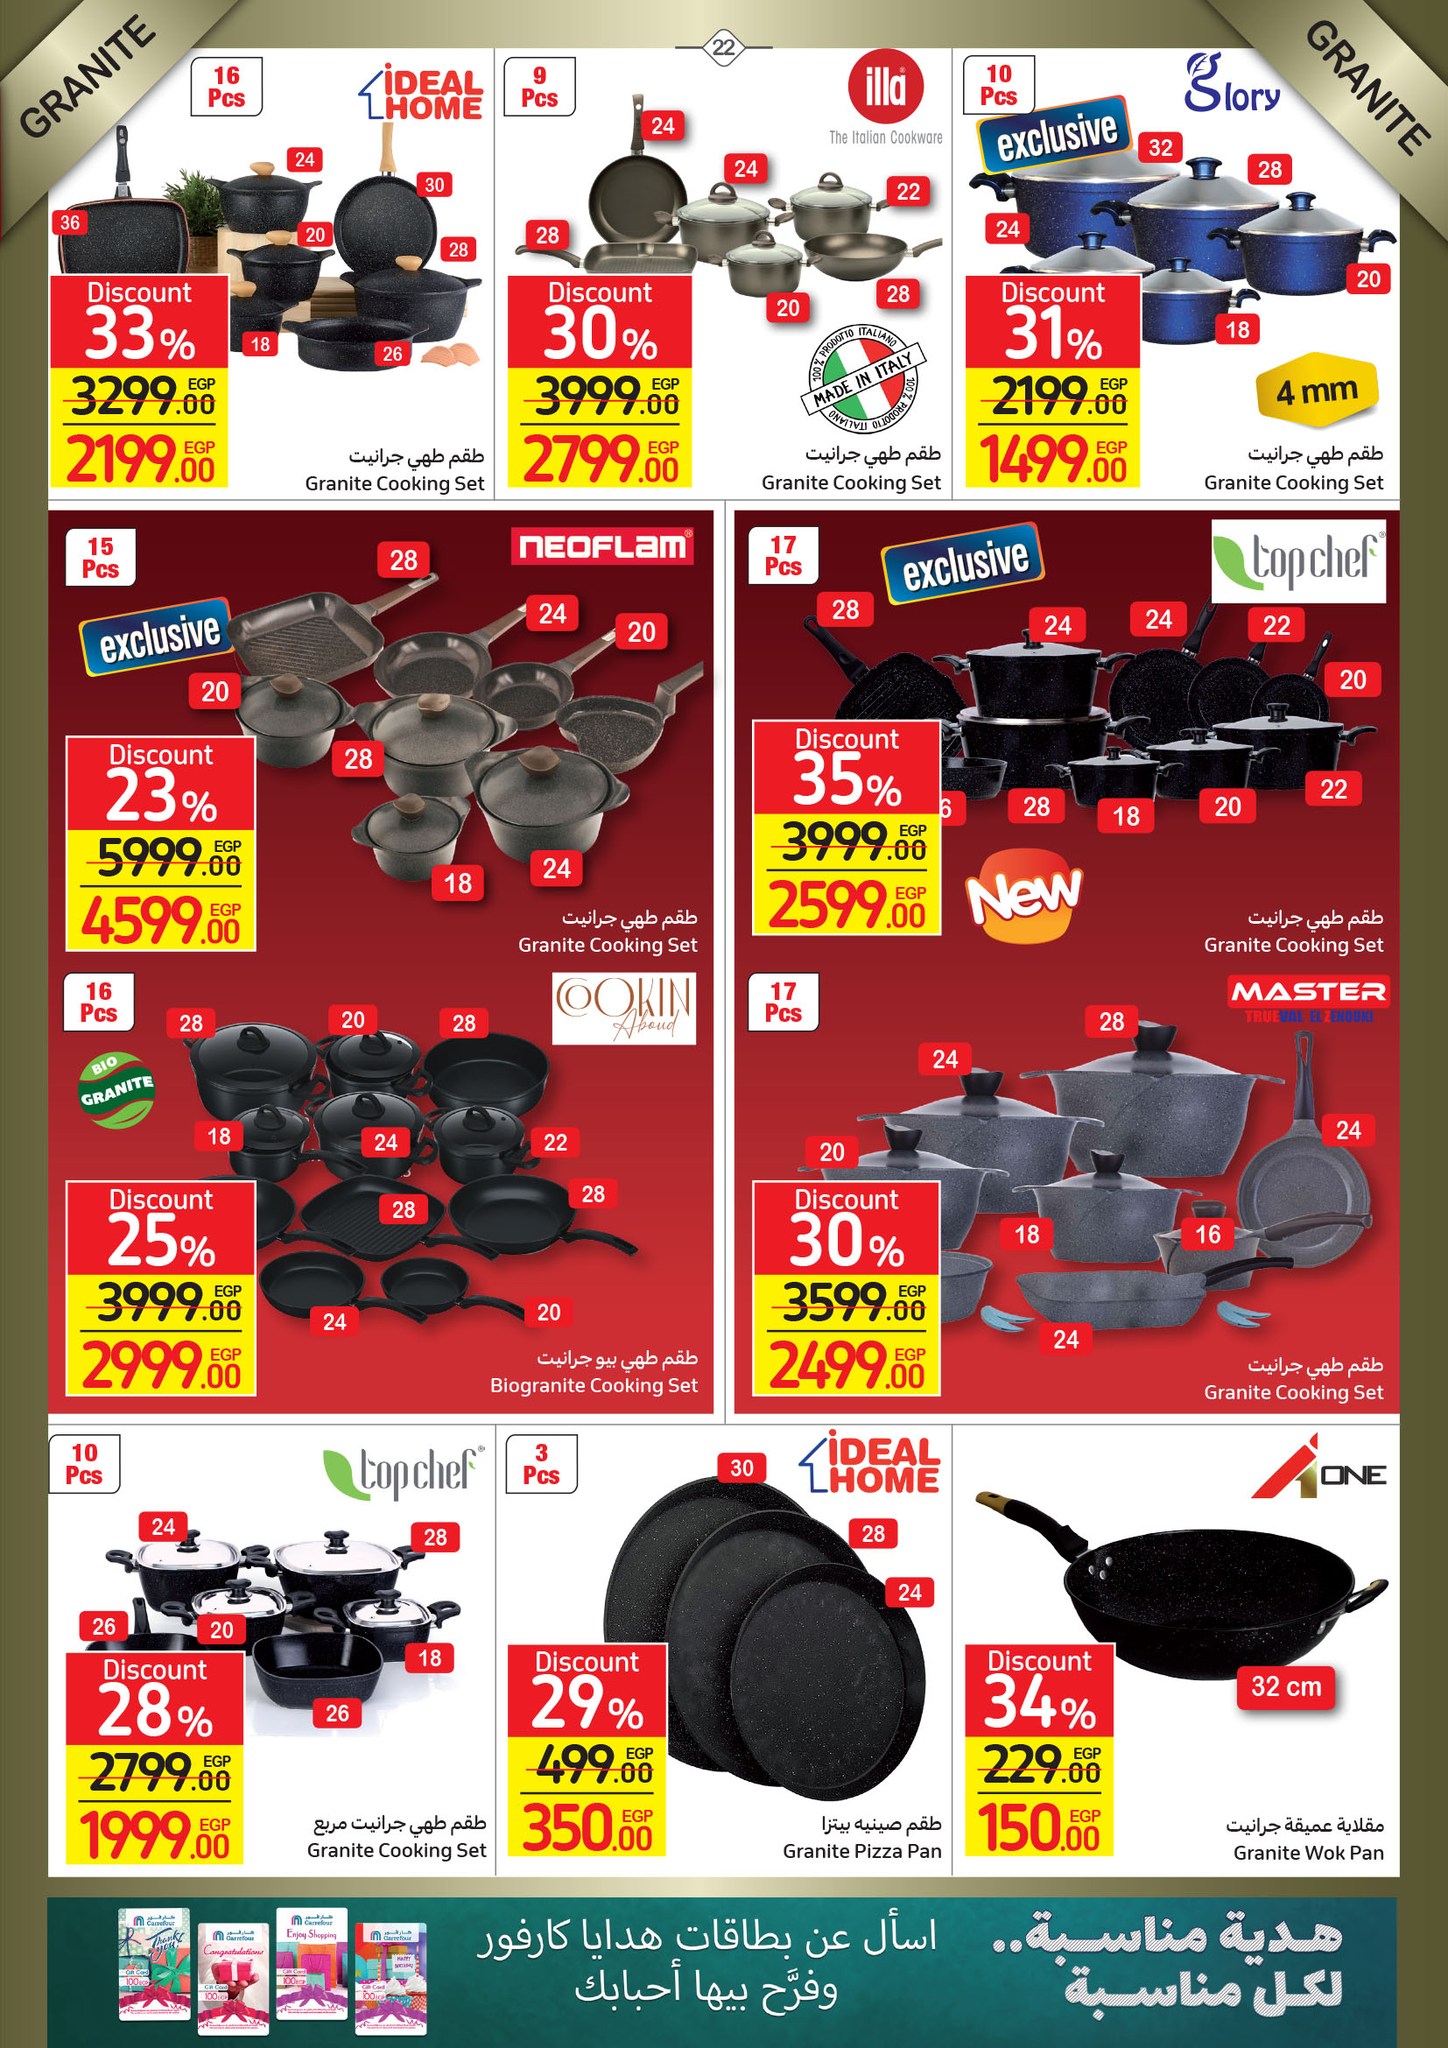 Watch the latest Carrefour half price offers "Last Chance Offer" until December 4 22